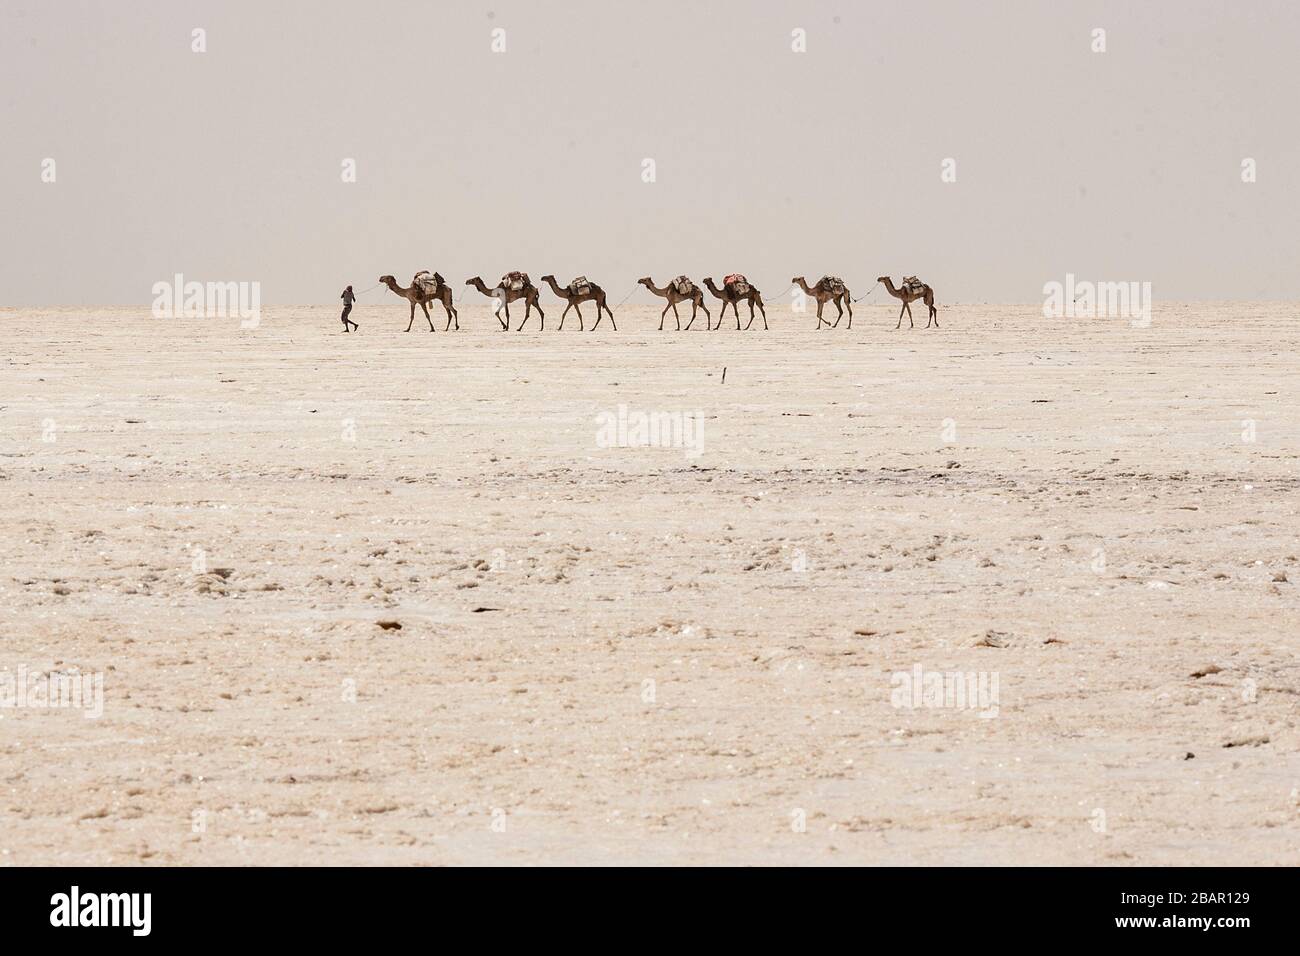 Camel caravan carrying salt from the Danakil depression in northern Ethiopia. Stock Photo